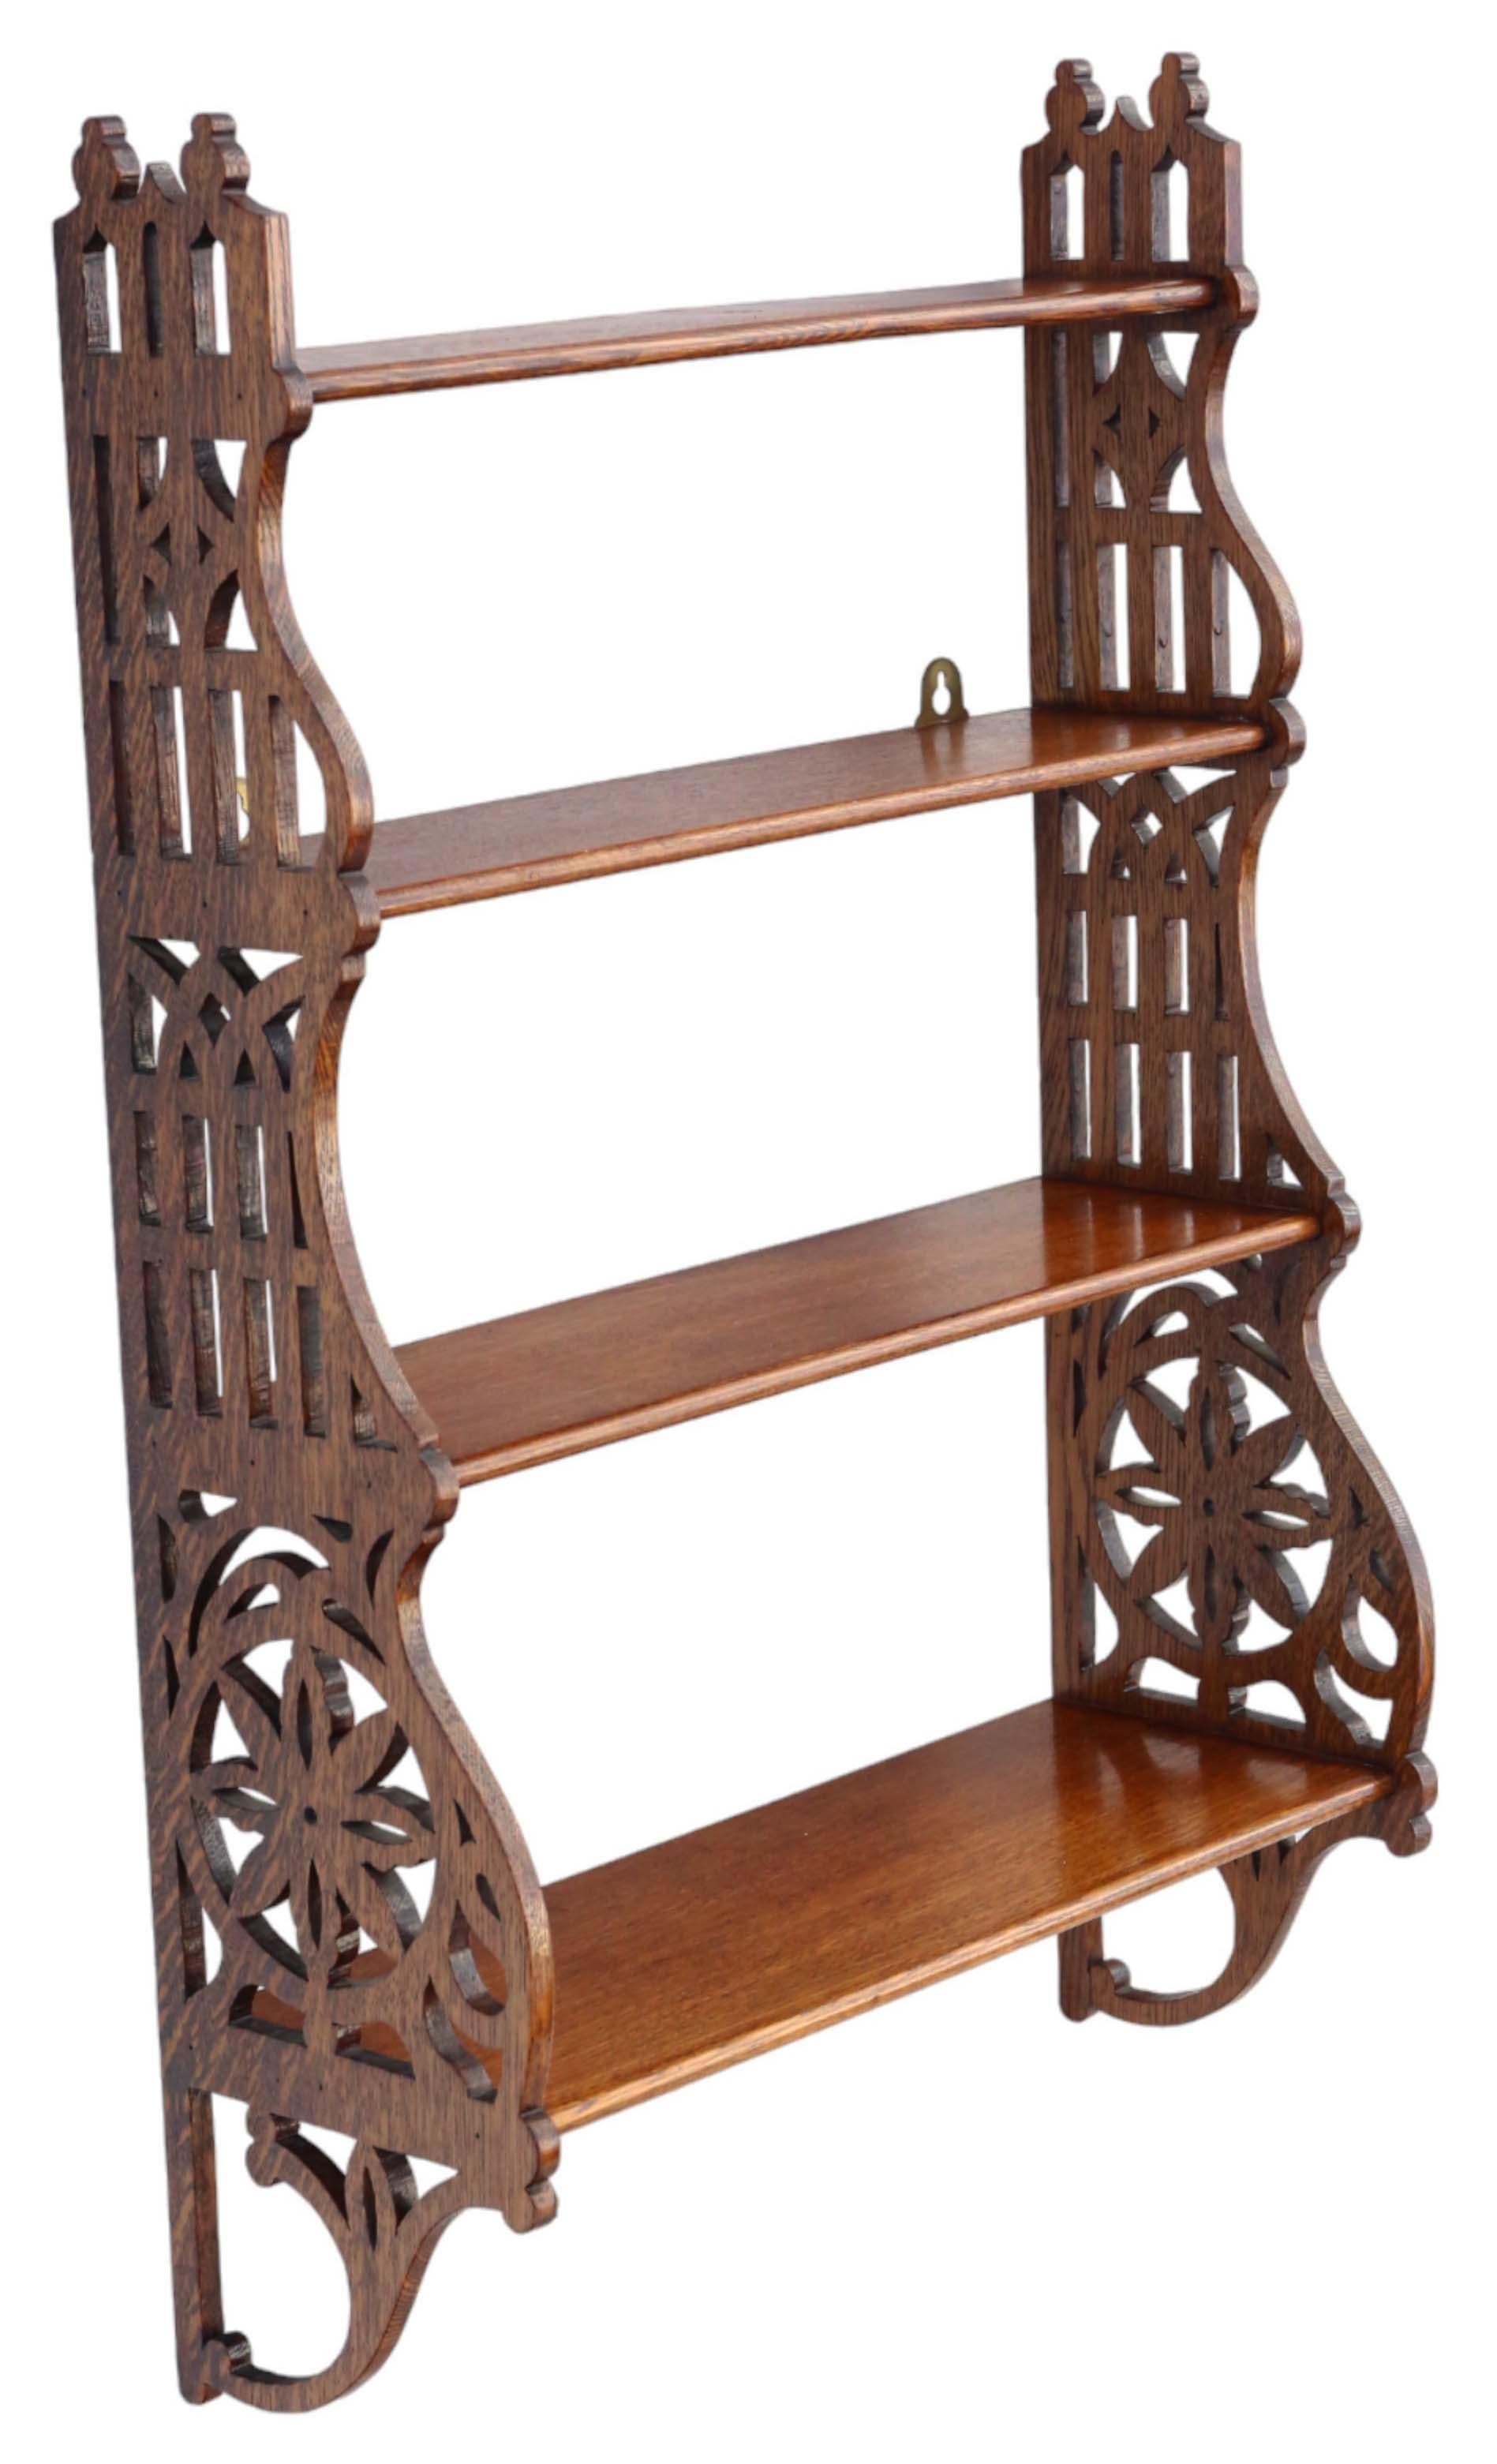 Antique Victorian Gothic circa 1900 fret-cut oak bookcase wall shelves of exceptional quality.

This piece exudes age, charm, and character, featuring a robust structure with no loose joints and no woodworm.

Its presence would be striking in the